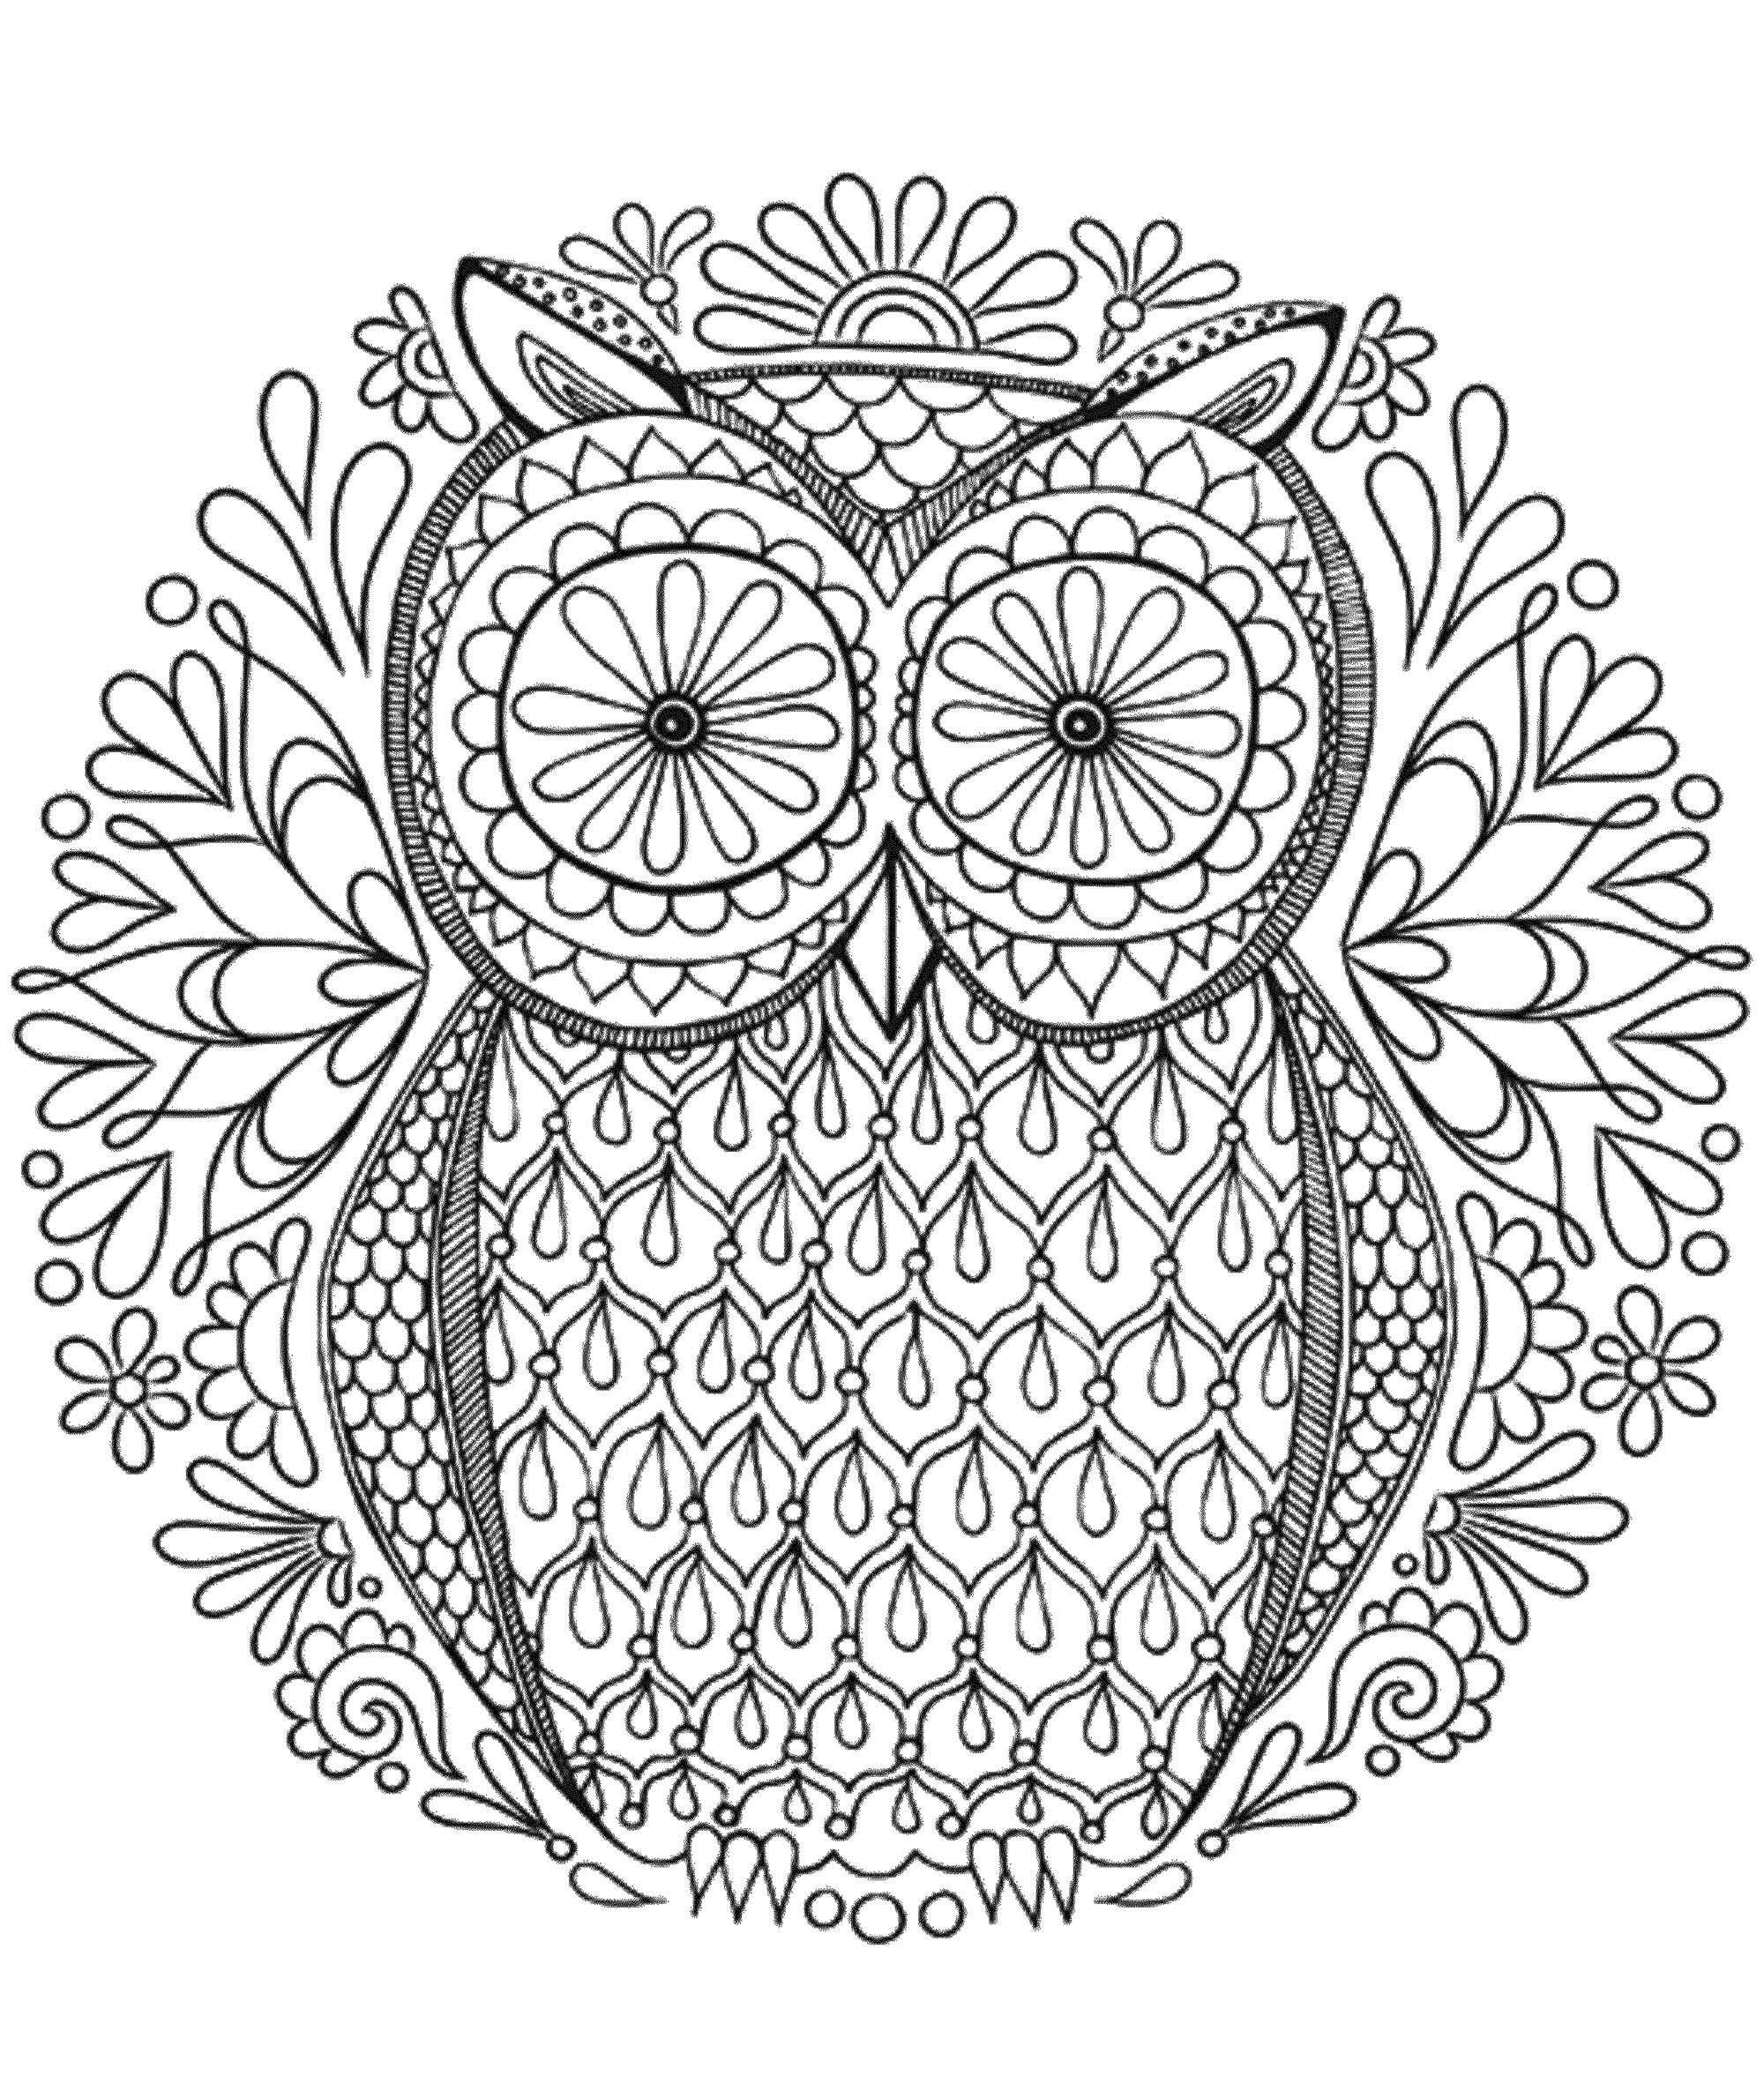 mandala-coloring-pages-relaxing-coloring-pages-for-adults-anti-stress